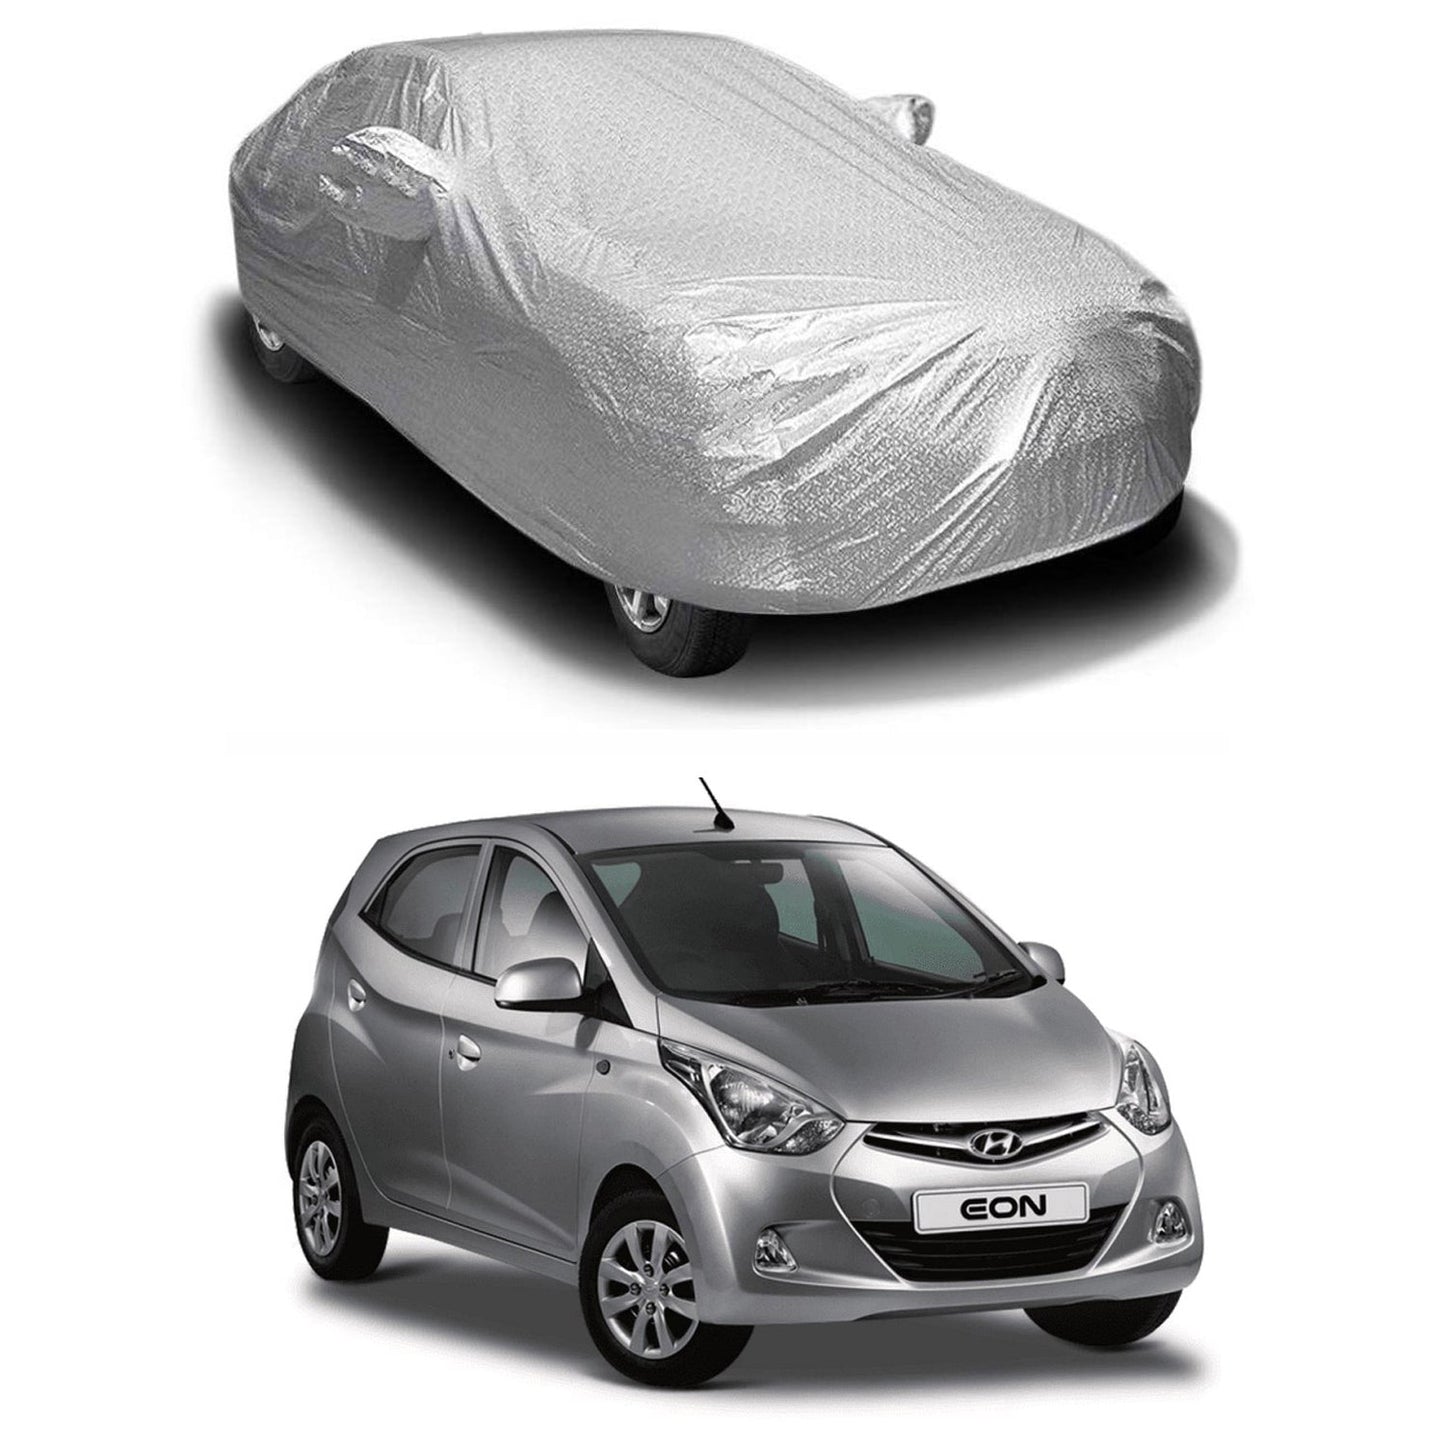 Oshotto Spyro Silver Anti Reflective, dustproof and Water Proof Car Body Cover with Mirror Pockets For Hyundai Eon